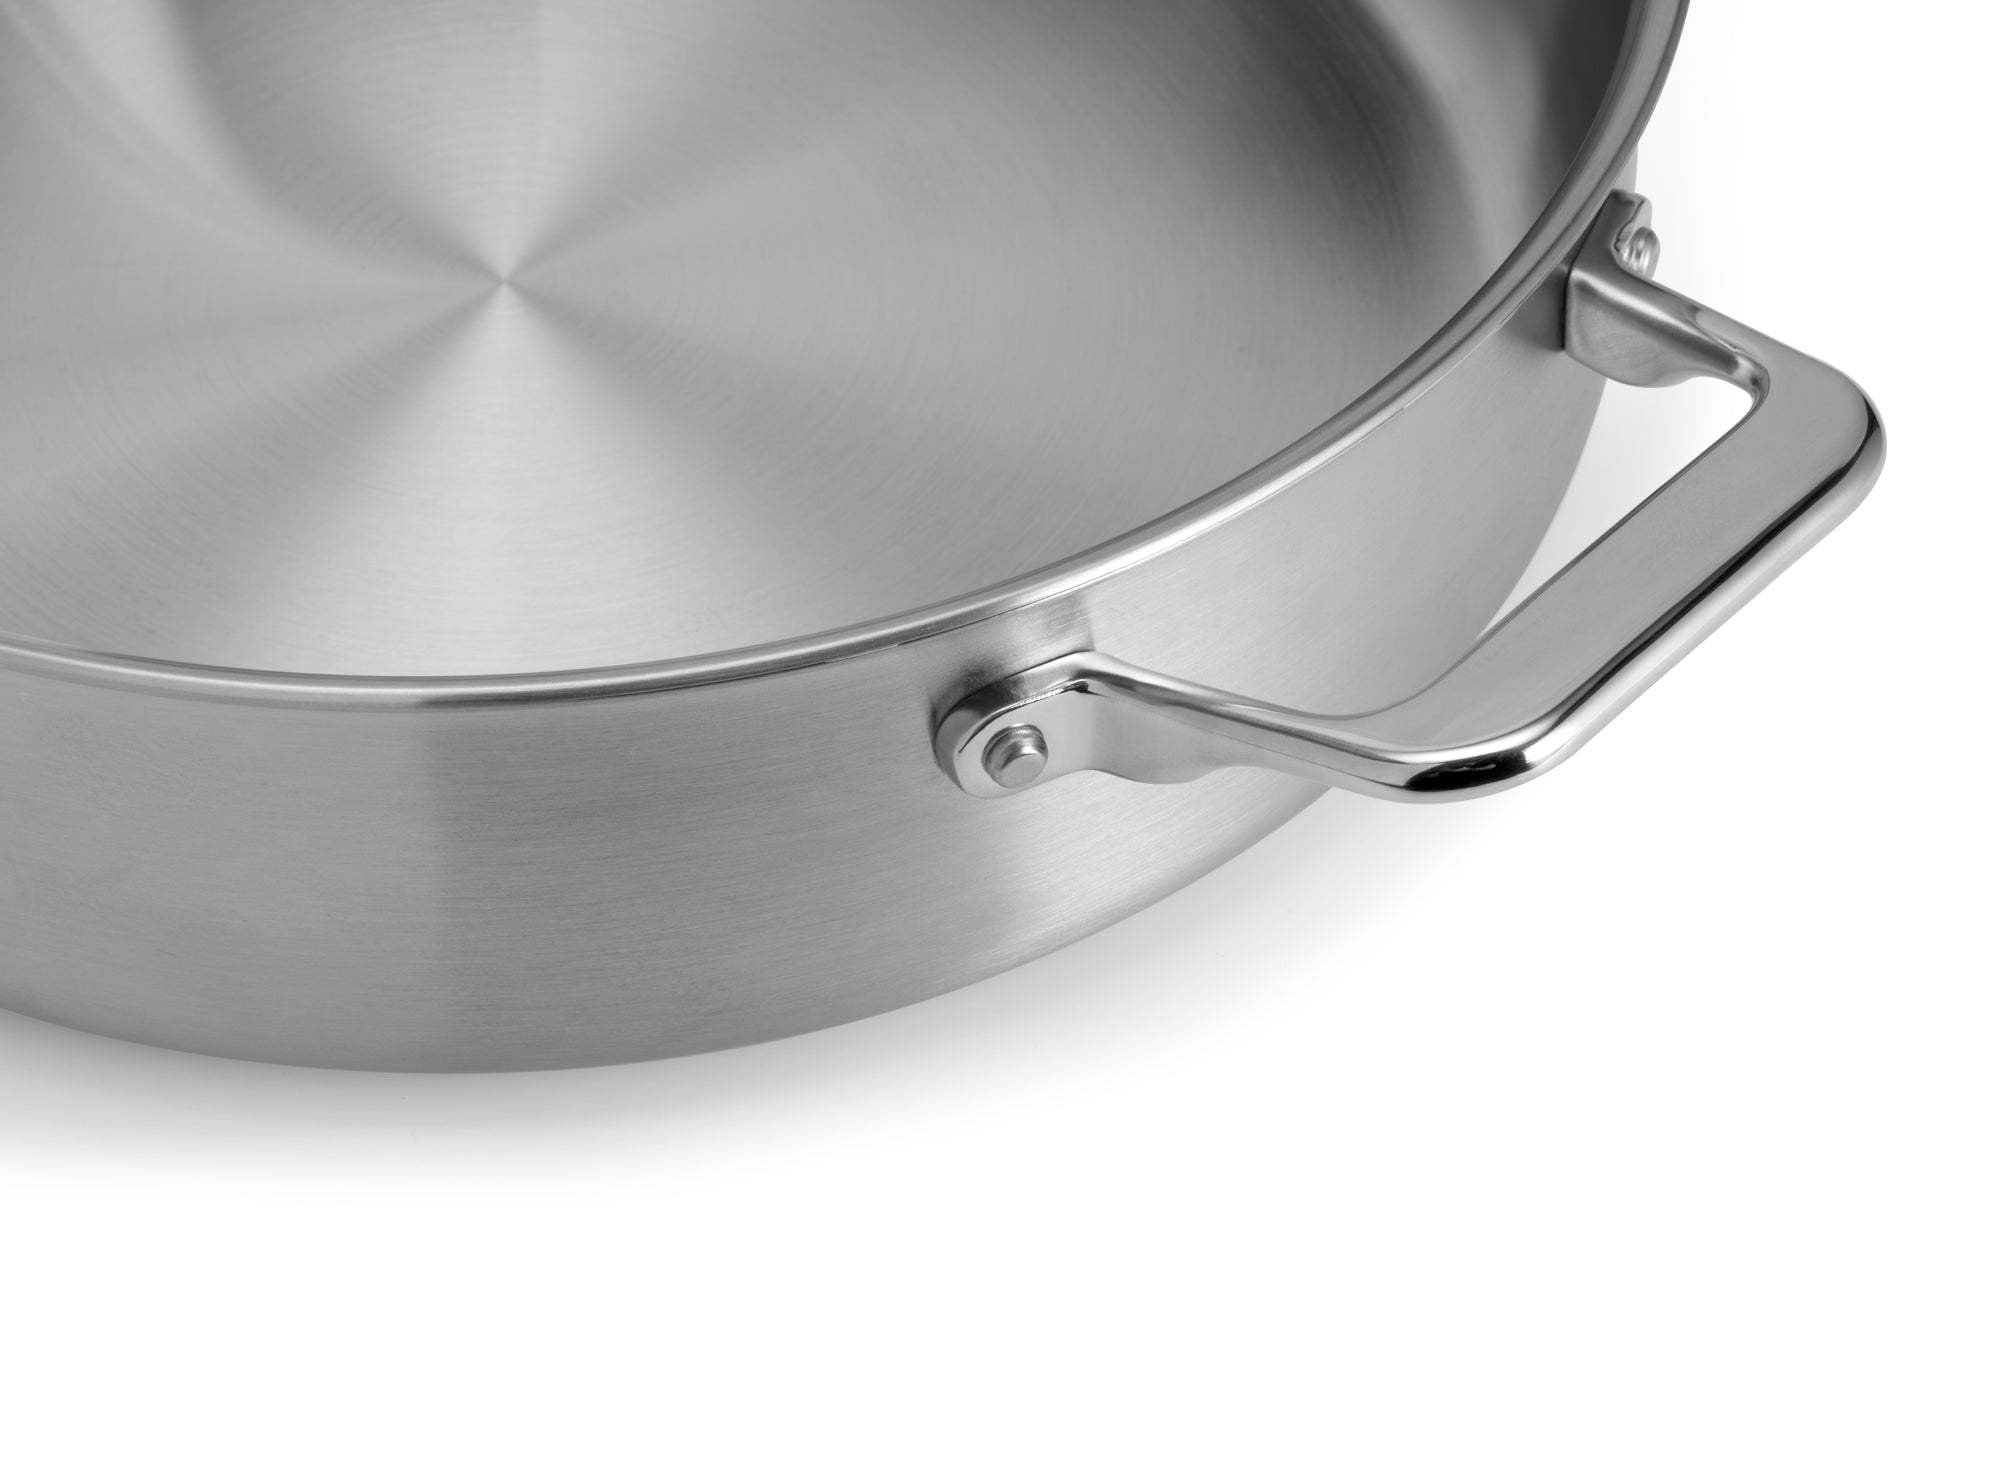 {{6-qt}} The handles of the Misen 6 QT Rondeau provide ample room for a comfortable grip.